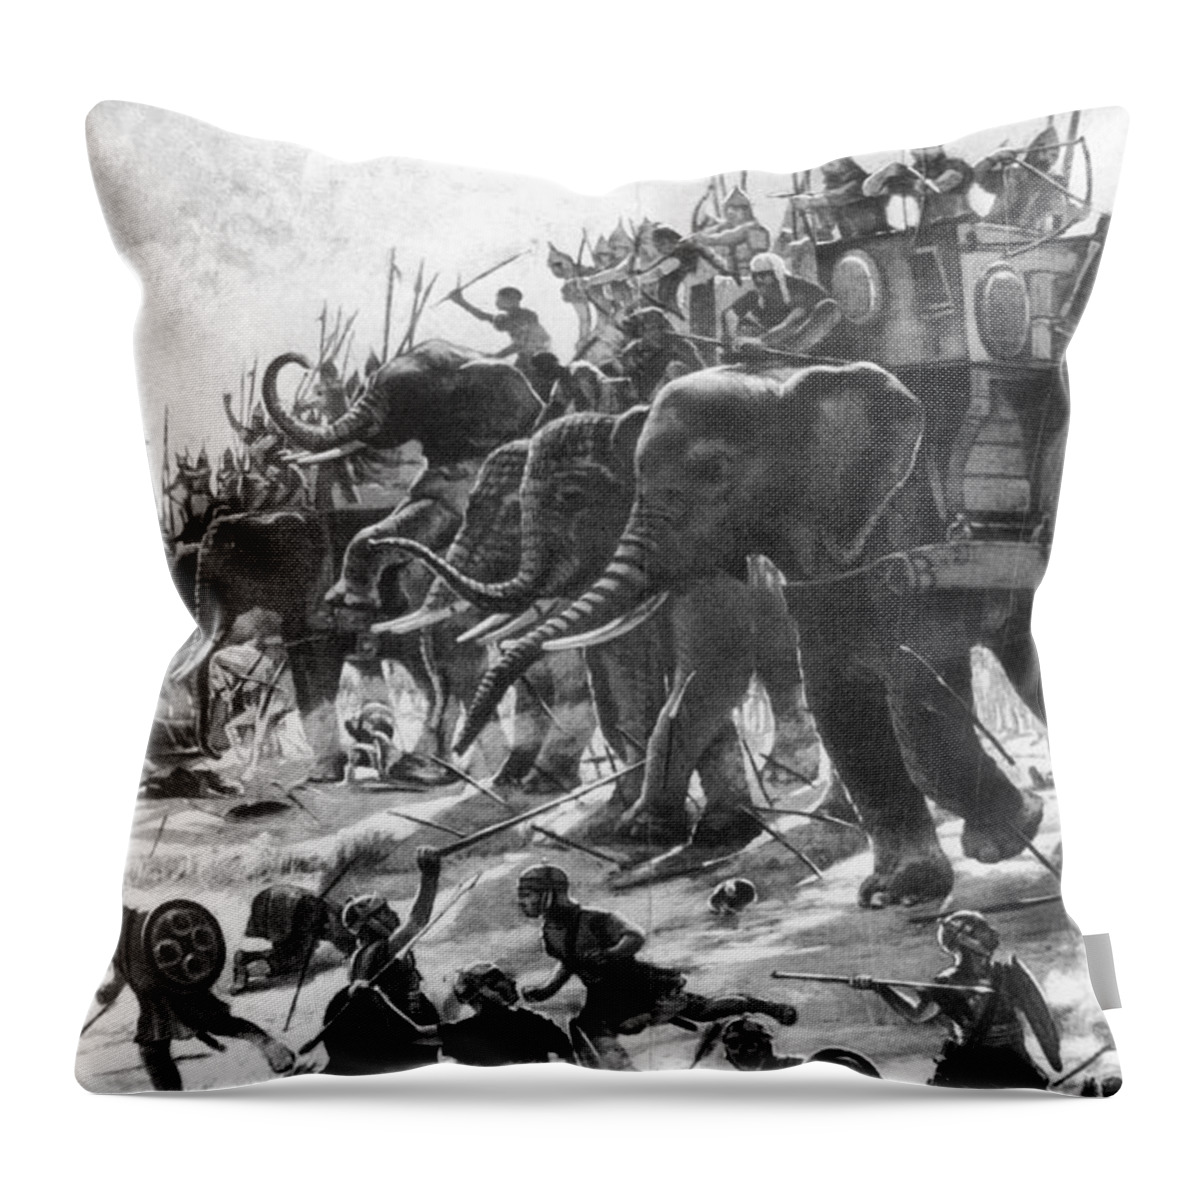 History Throw Pillow featuring the photograph Battle Of Zama, Hannibals Defeat by Photo Researchers